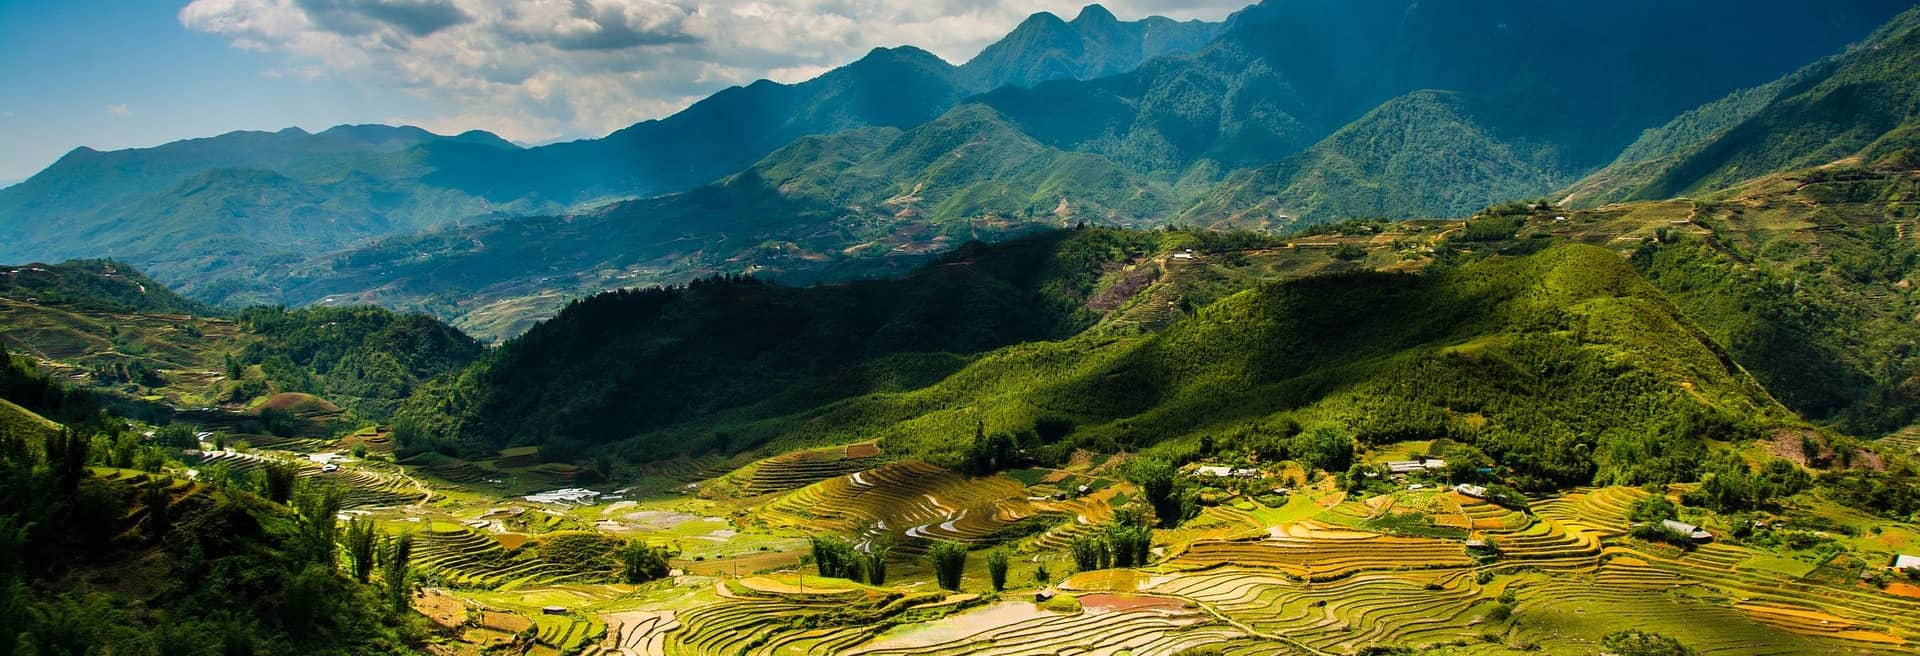 Muong Hoa Valley – Eden in Sapa and Necessary Things to Know